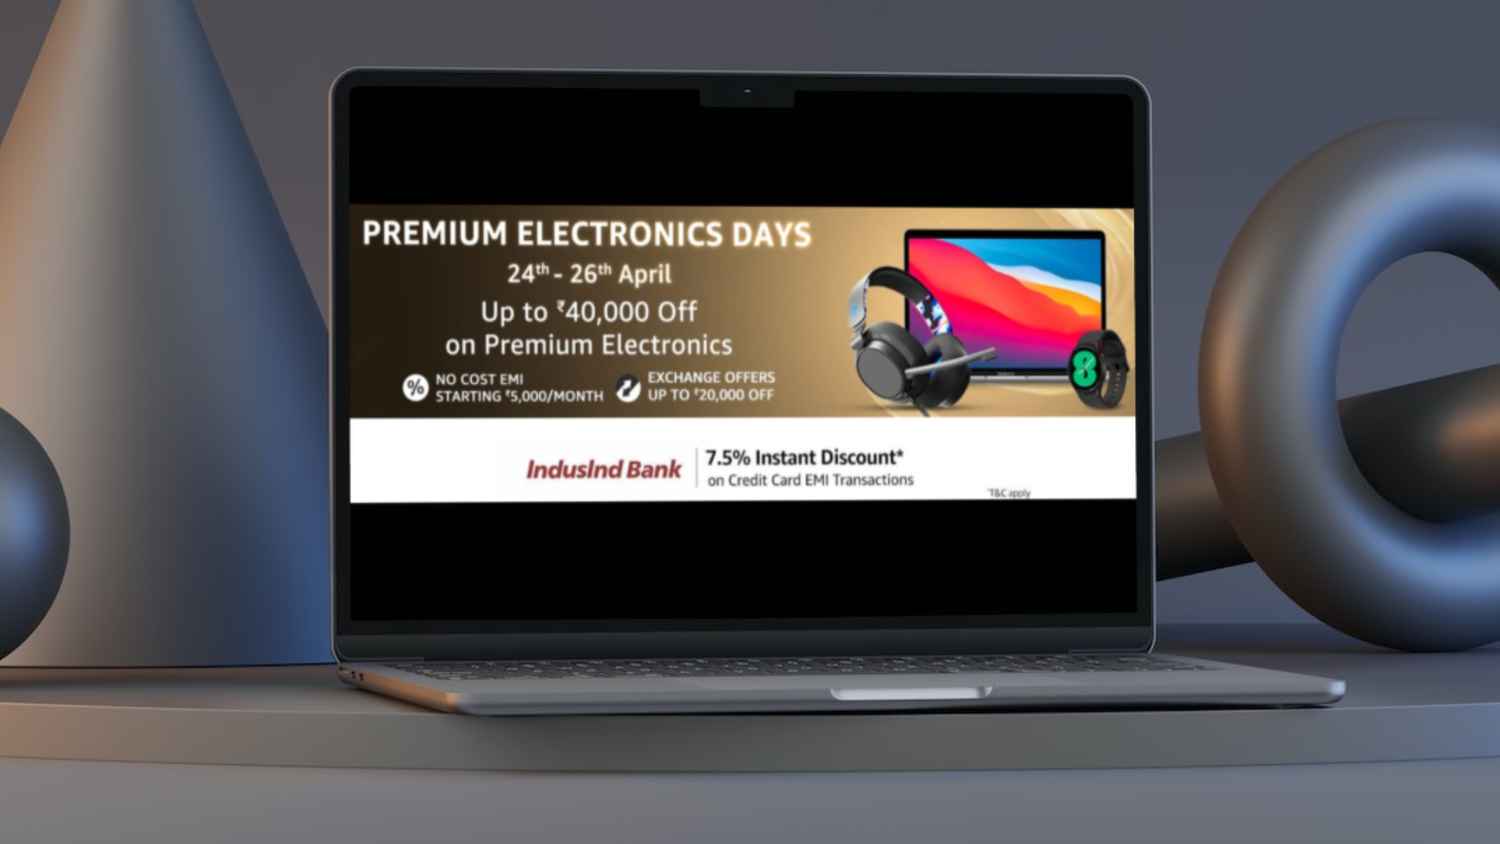 Amazon Premium Electronics Days sale is live: Here are 5 laptop deals worth taking a look at